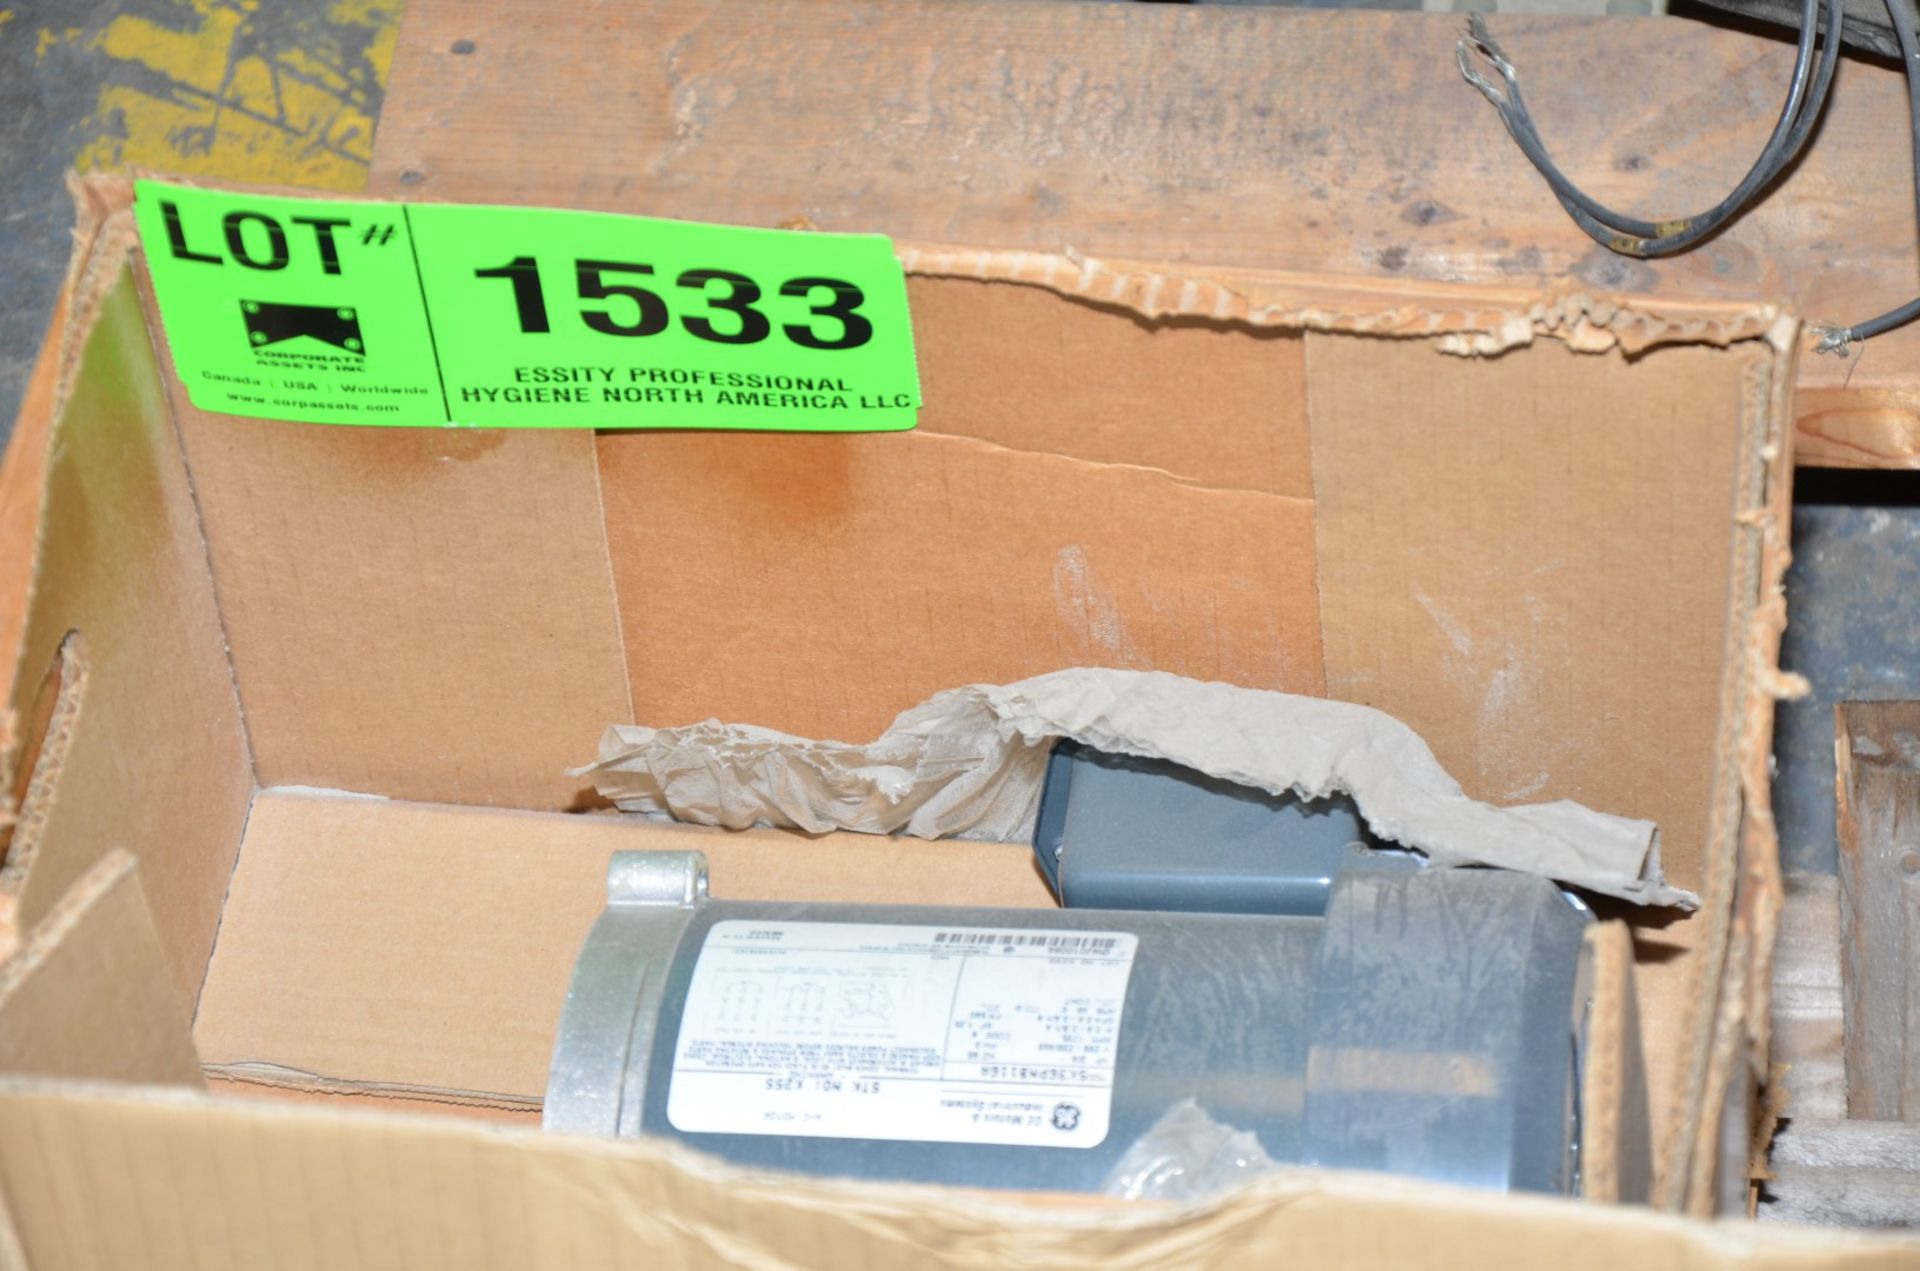 VECTOR 3/4 HP 1770 RPM 460V ELECTRIC MOTOR [RIGGING FEE FOR LOT #1533 - $25 USD PLUS APPLICABLE